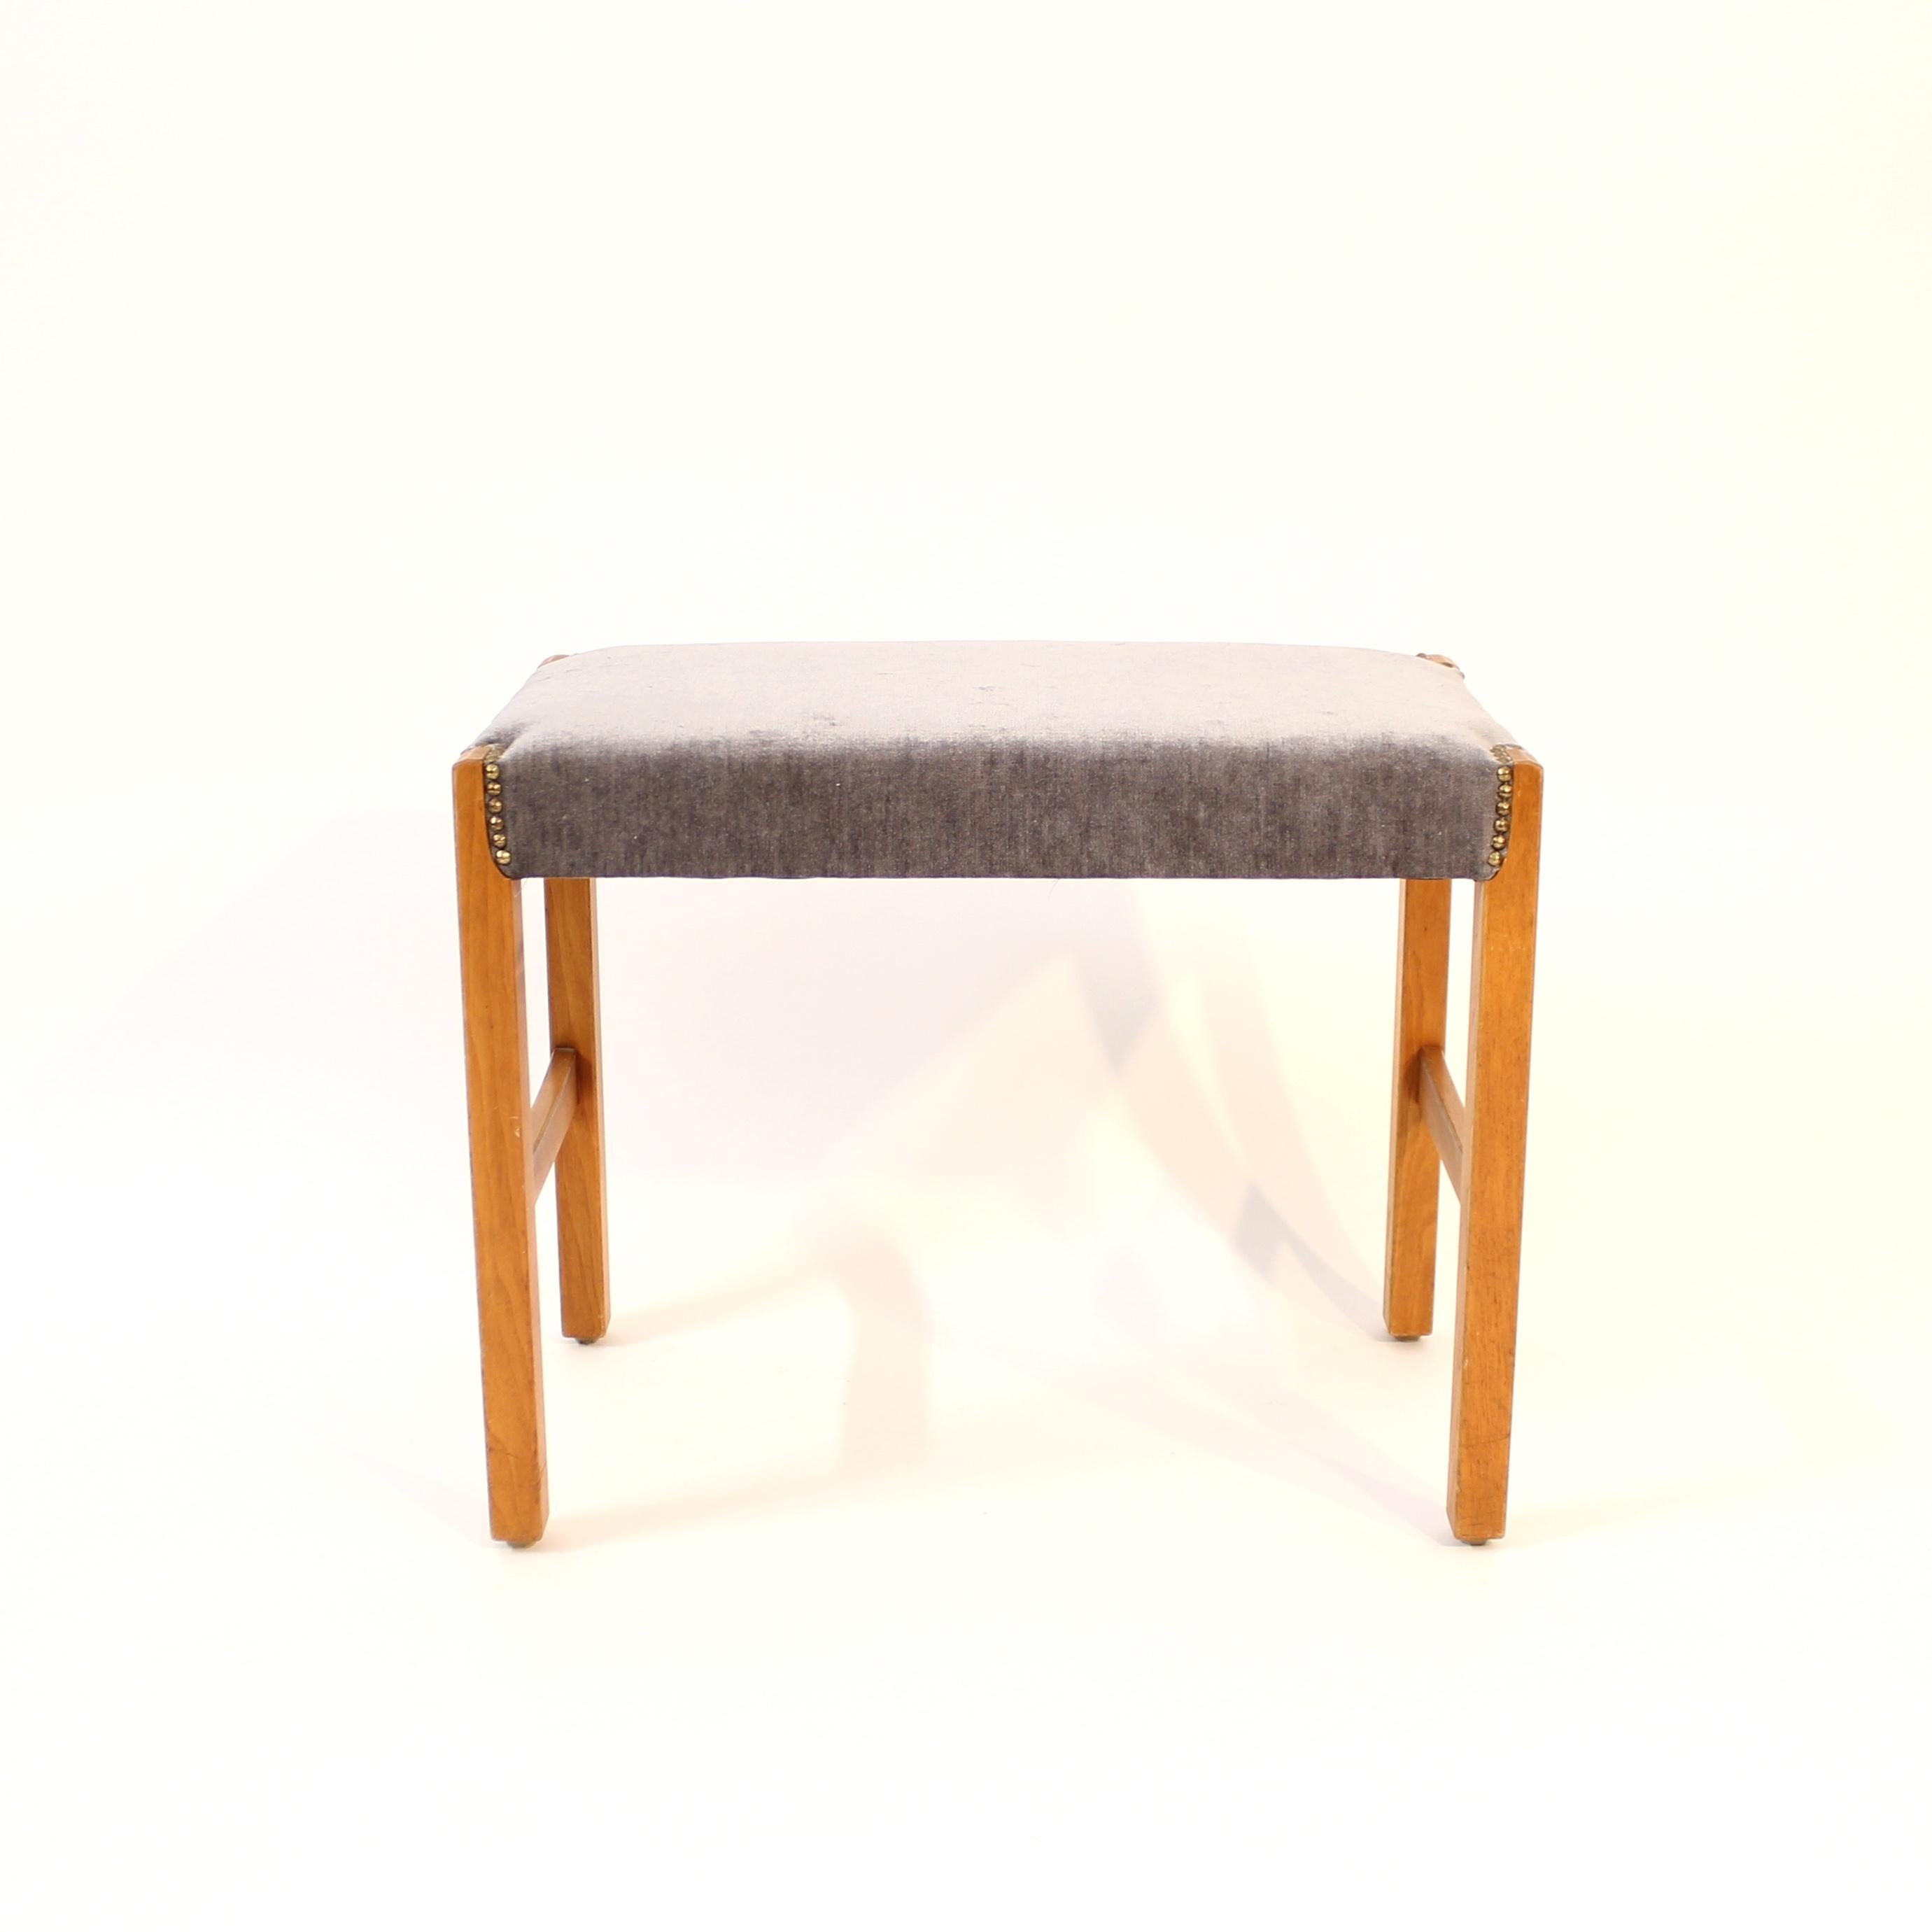 Swedish Scandinavian mid-century stool / piano stool in the style of Josef Frank, 1950s For Sale